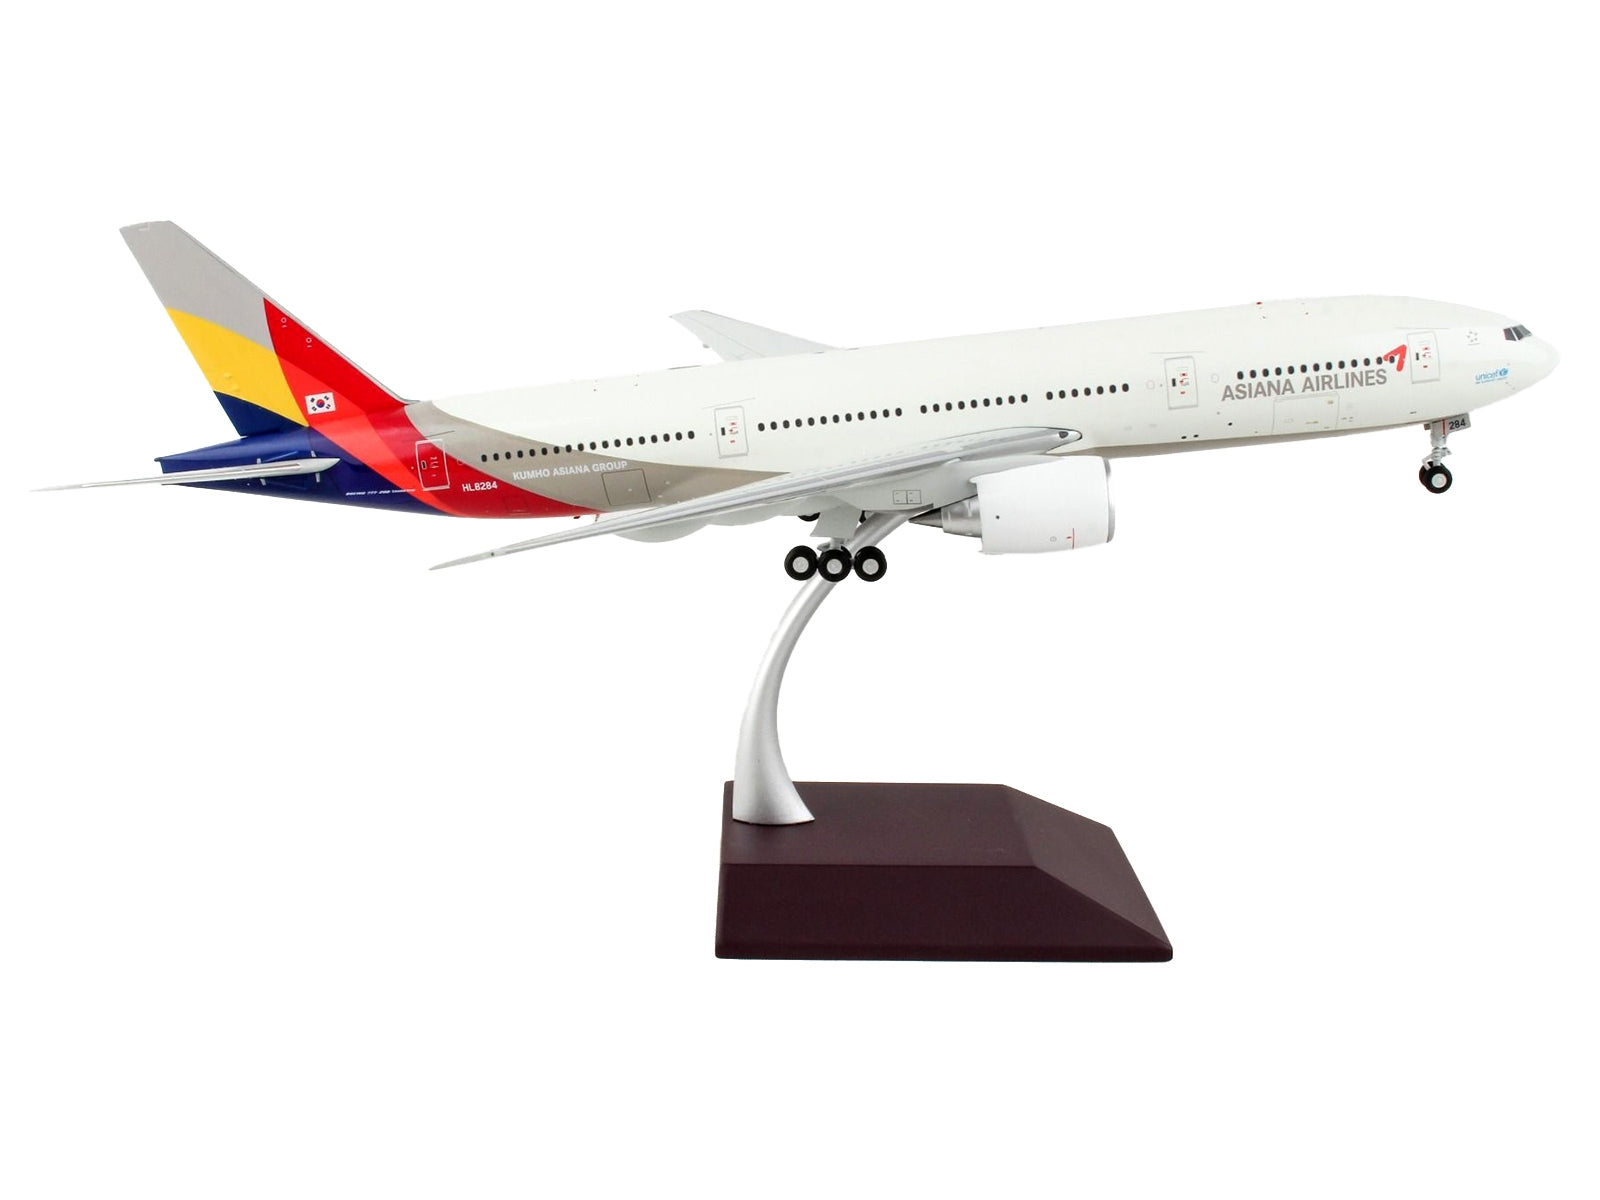 Boeing 777-200ER Commercial Aircraft "Asiana Airlines" White with Striped Tail "Gemini 200" Series 1/200 Diecast Model Airplane by GeminiJets